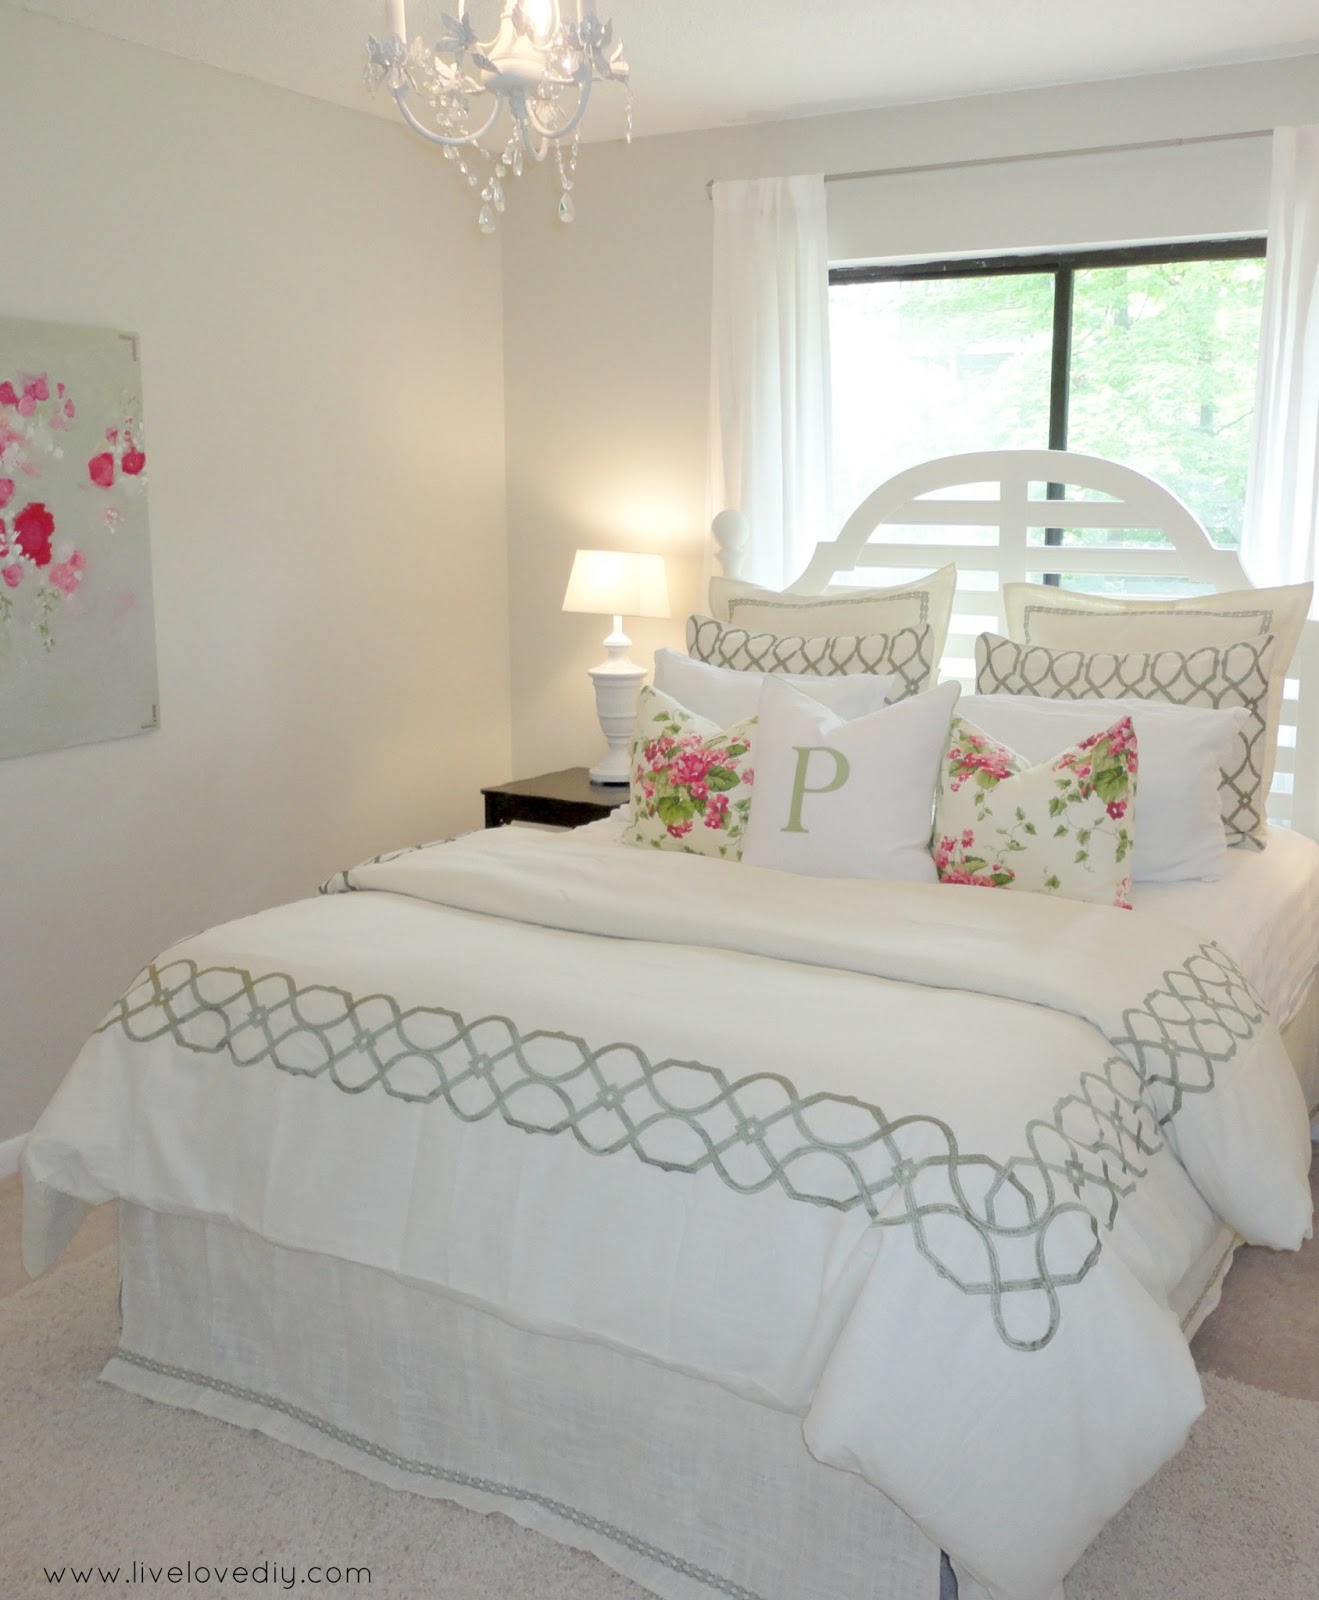 LiveLoveDIY Decorating Bedrooms With Secondhand Finds The Guest